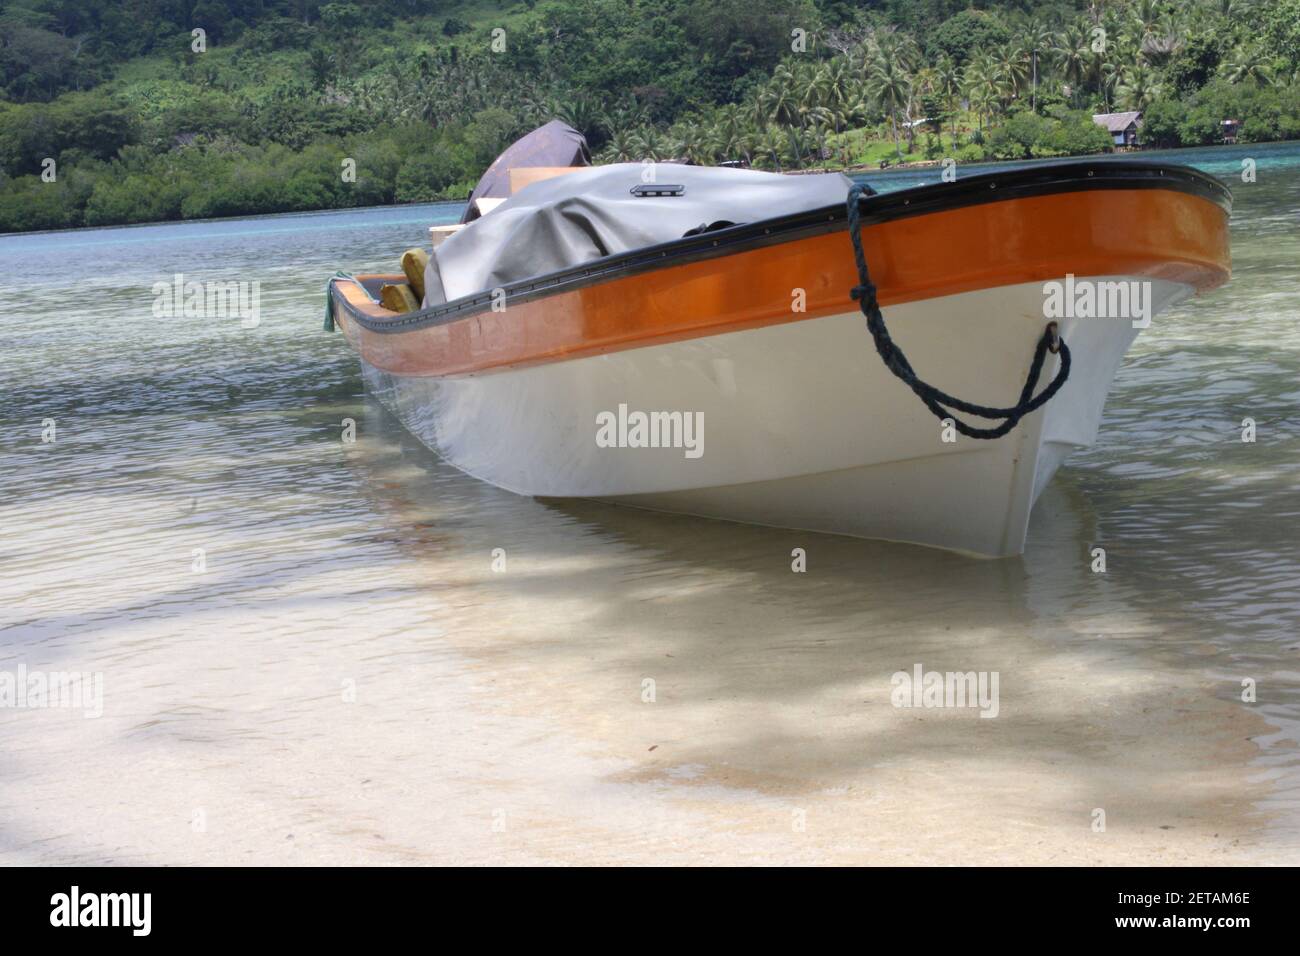 A fiberglass dinghy berthed on the shores of Peli Island in Manus Province, Papua New Guinea. These boats are also called banana boats by the locals. Stock Photo